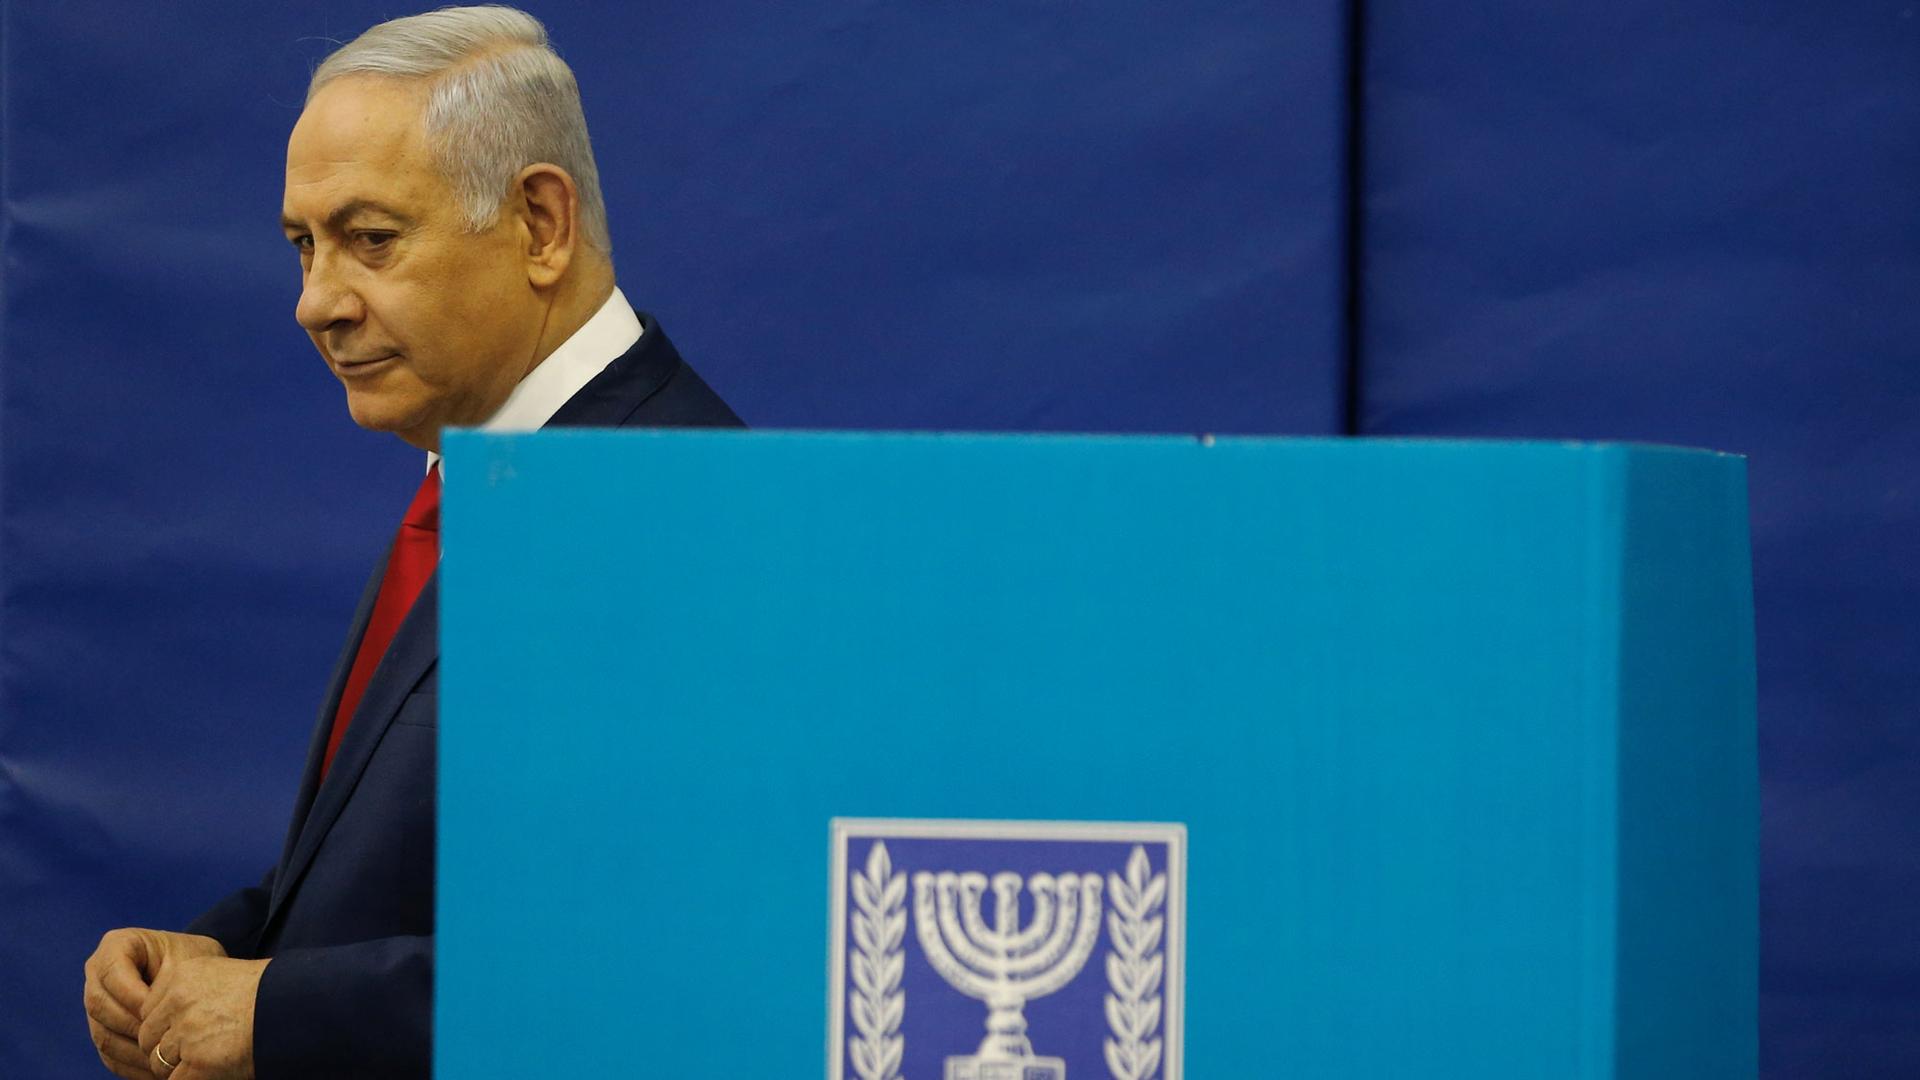 Israel’s Prime Minister Benjamin Netanyahu is shown wearing a blue suit and walking past a blue voting booth.